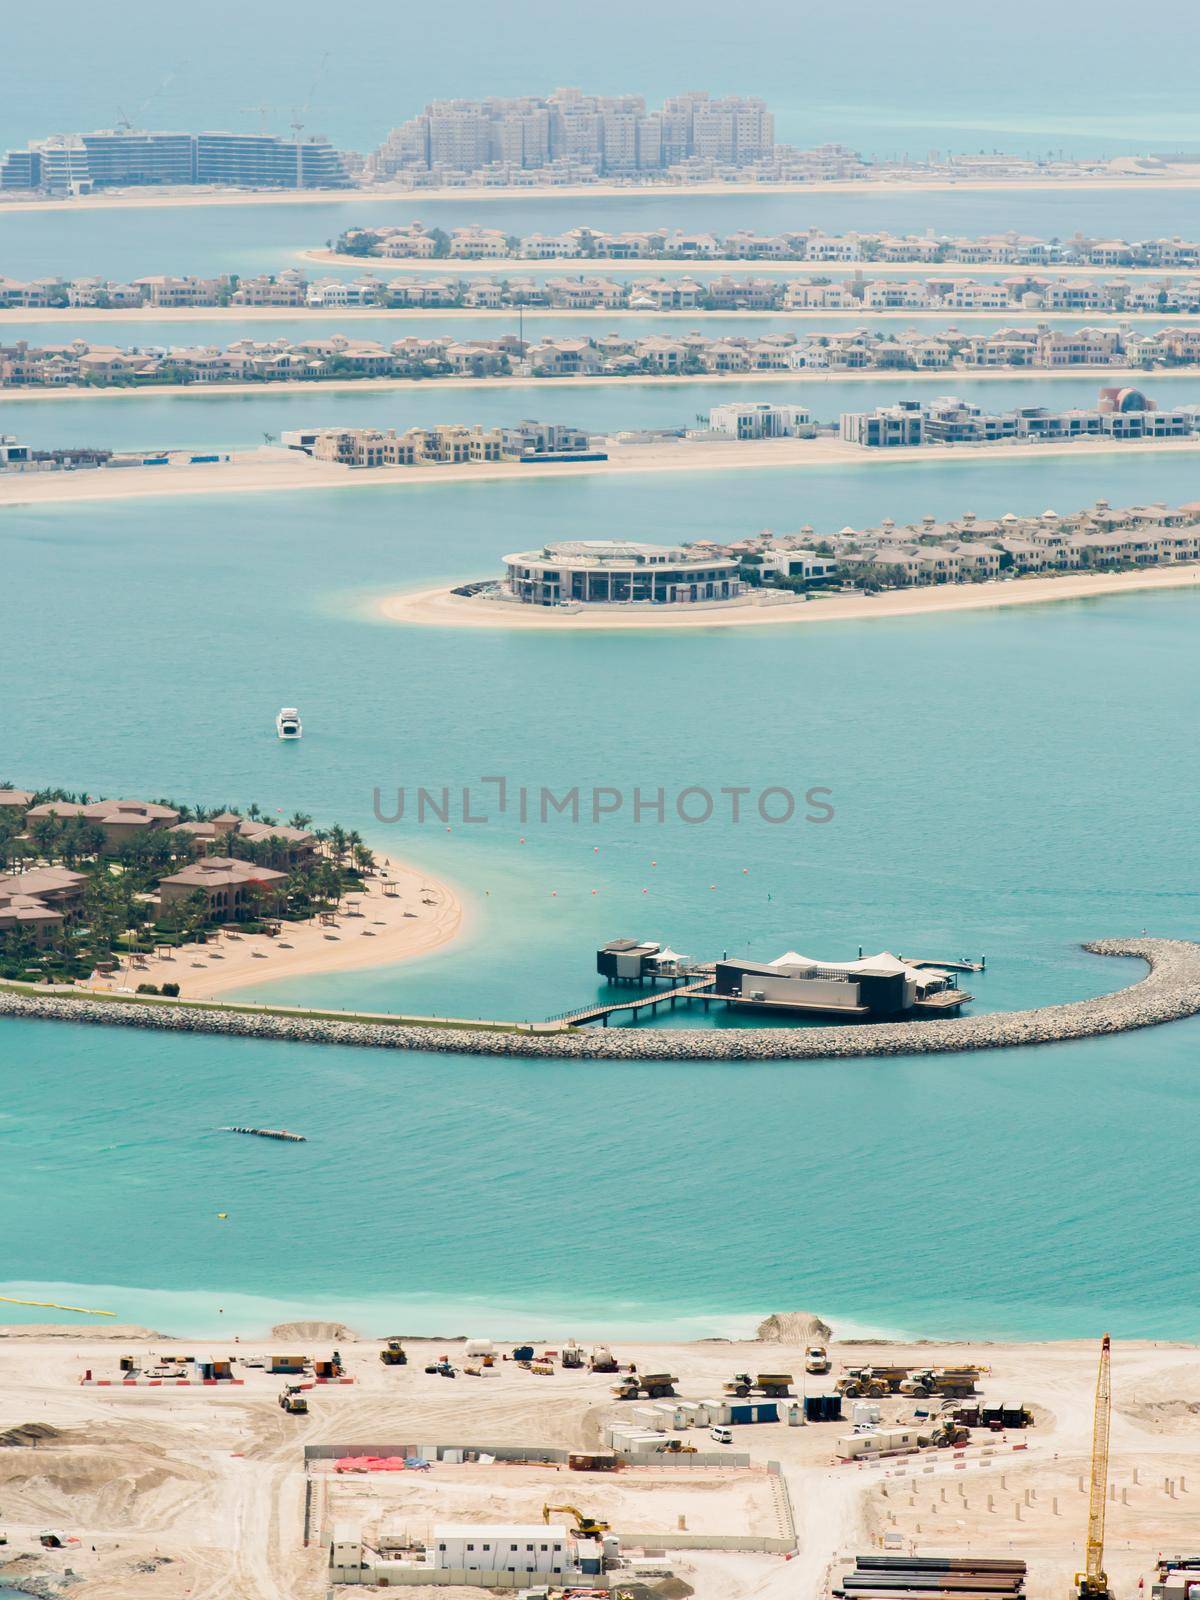 View on residential buildings on Palm Jumeirah island. The Palm Jumeirah is an artificial archipelago in Dubai emirate